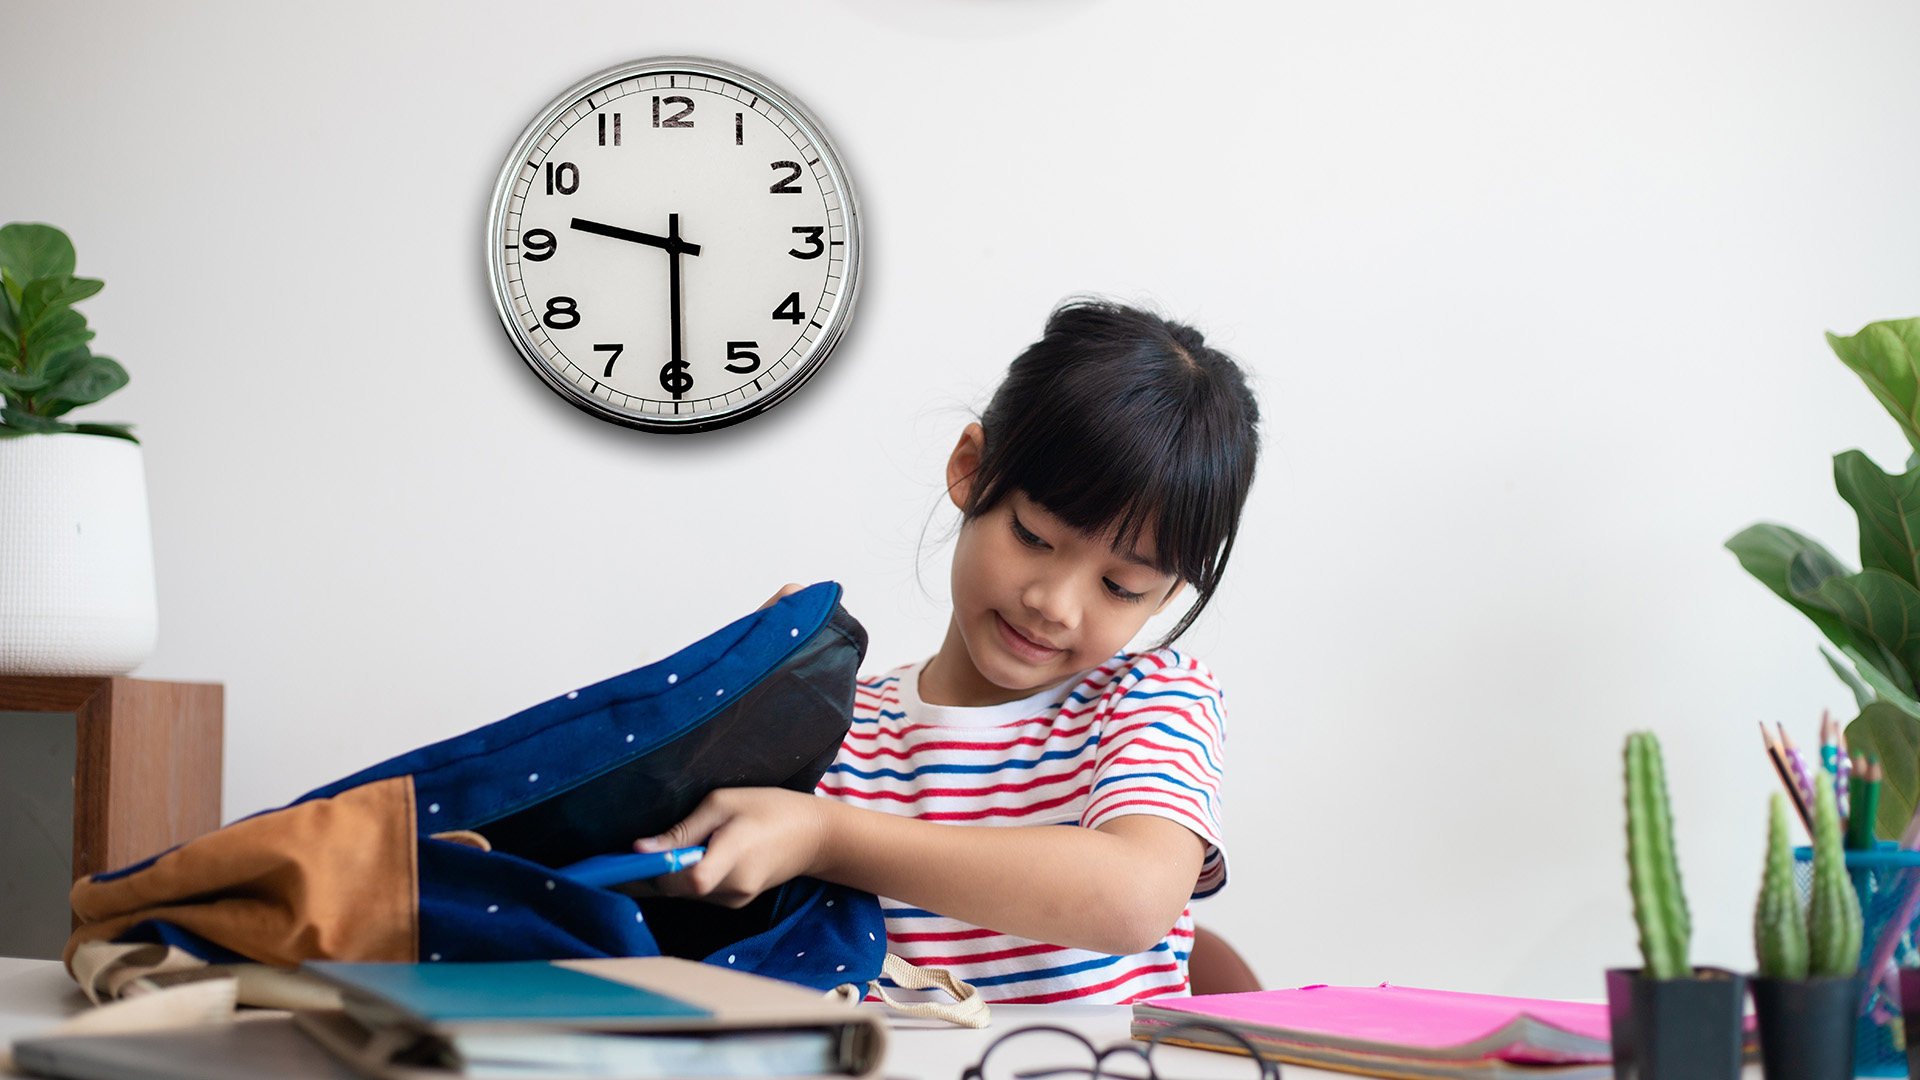 A primary school in China has banned homework in the late evenings and said it will not punish pupils who do not complete assignments, sparking a debate among parents. Photo: SCMP composite/Shutterstock